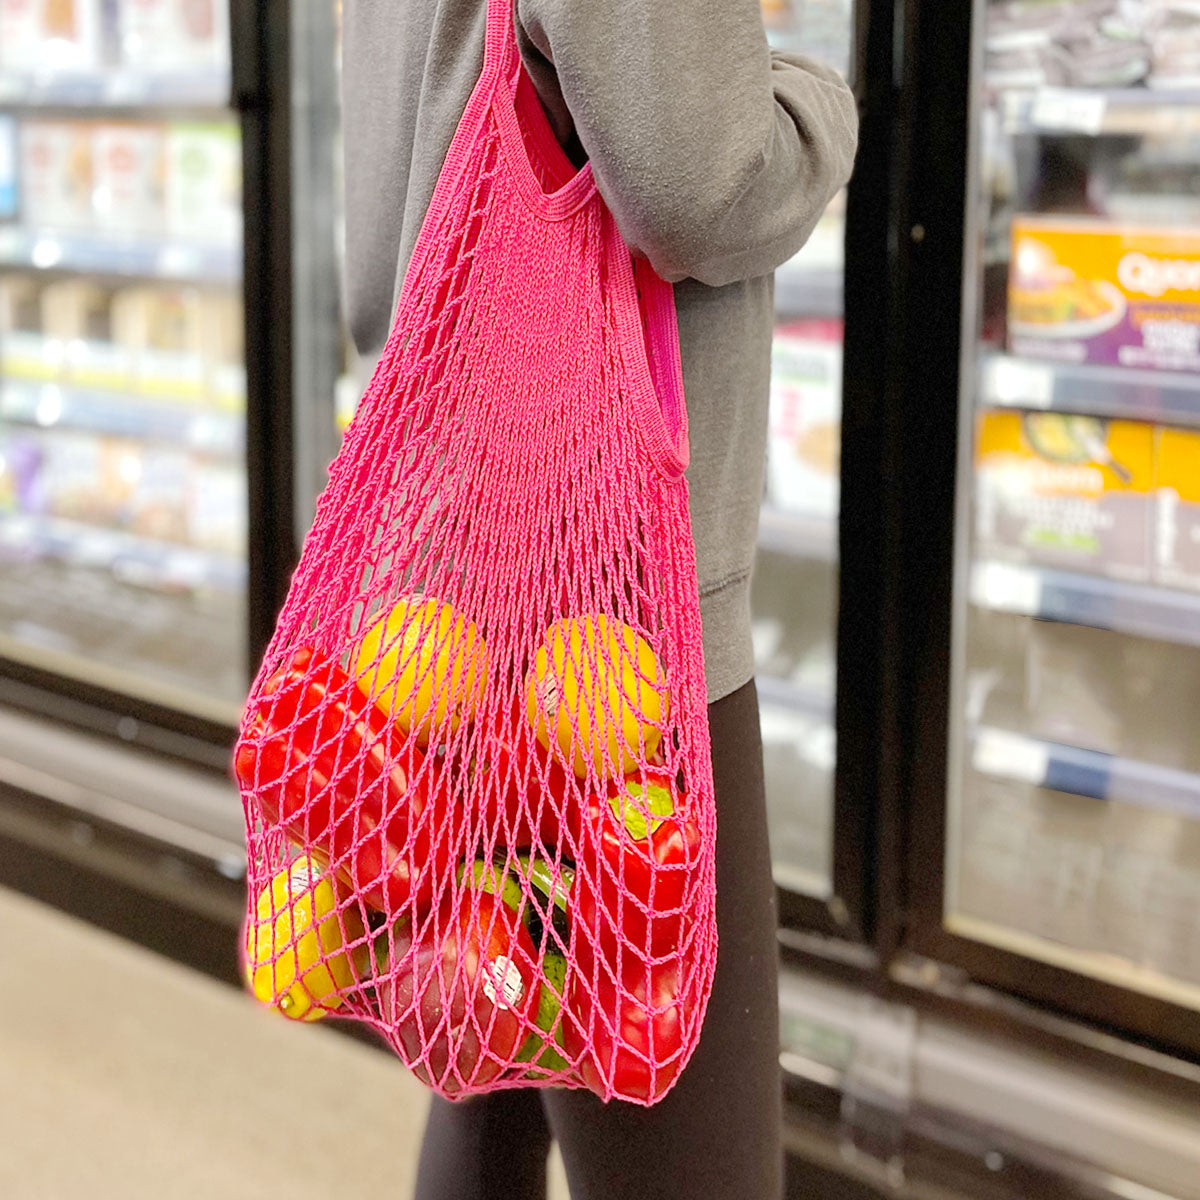 Wrapables Cotton Mesh Net Shopping Bag, Grocery Bag for Vegetables, Produce (Set of 3) Yellow/ Blue / Hot Pink